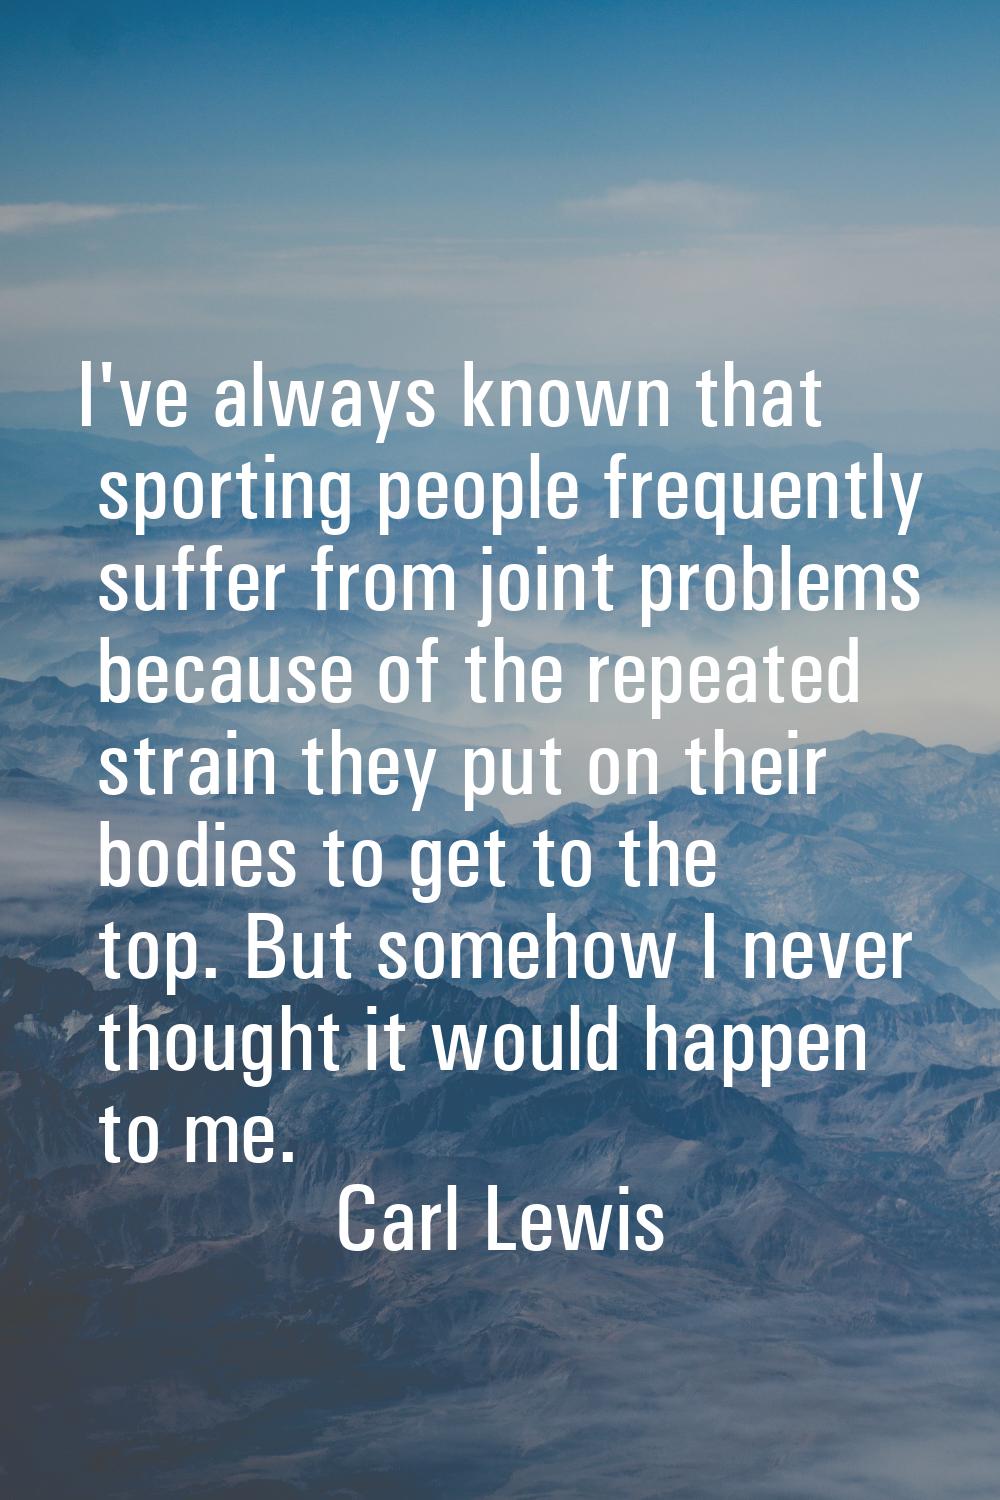 I've always known that sporting people frequently suffer from joint problems because of the repeate